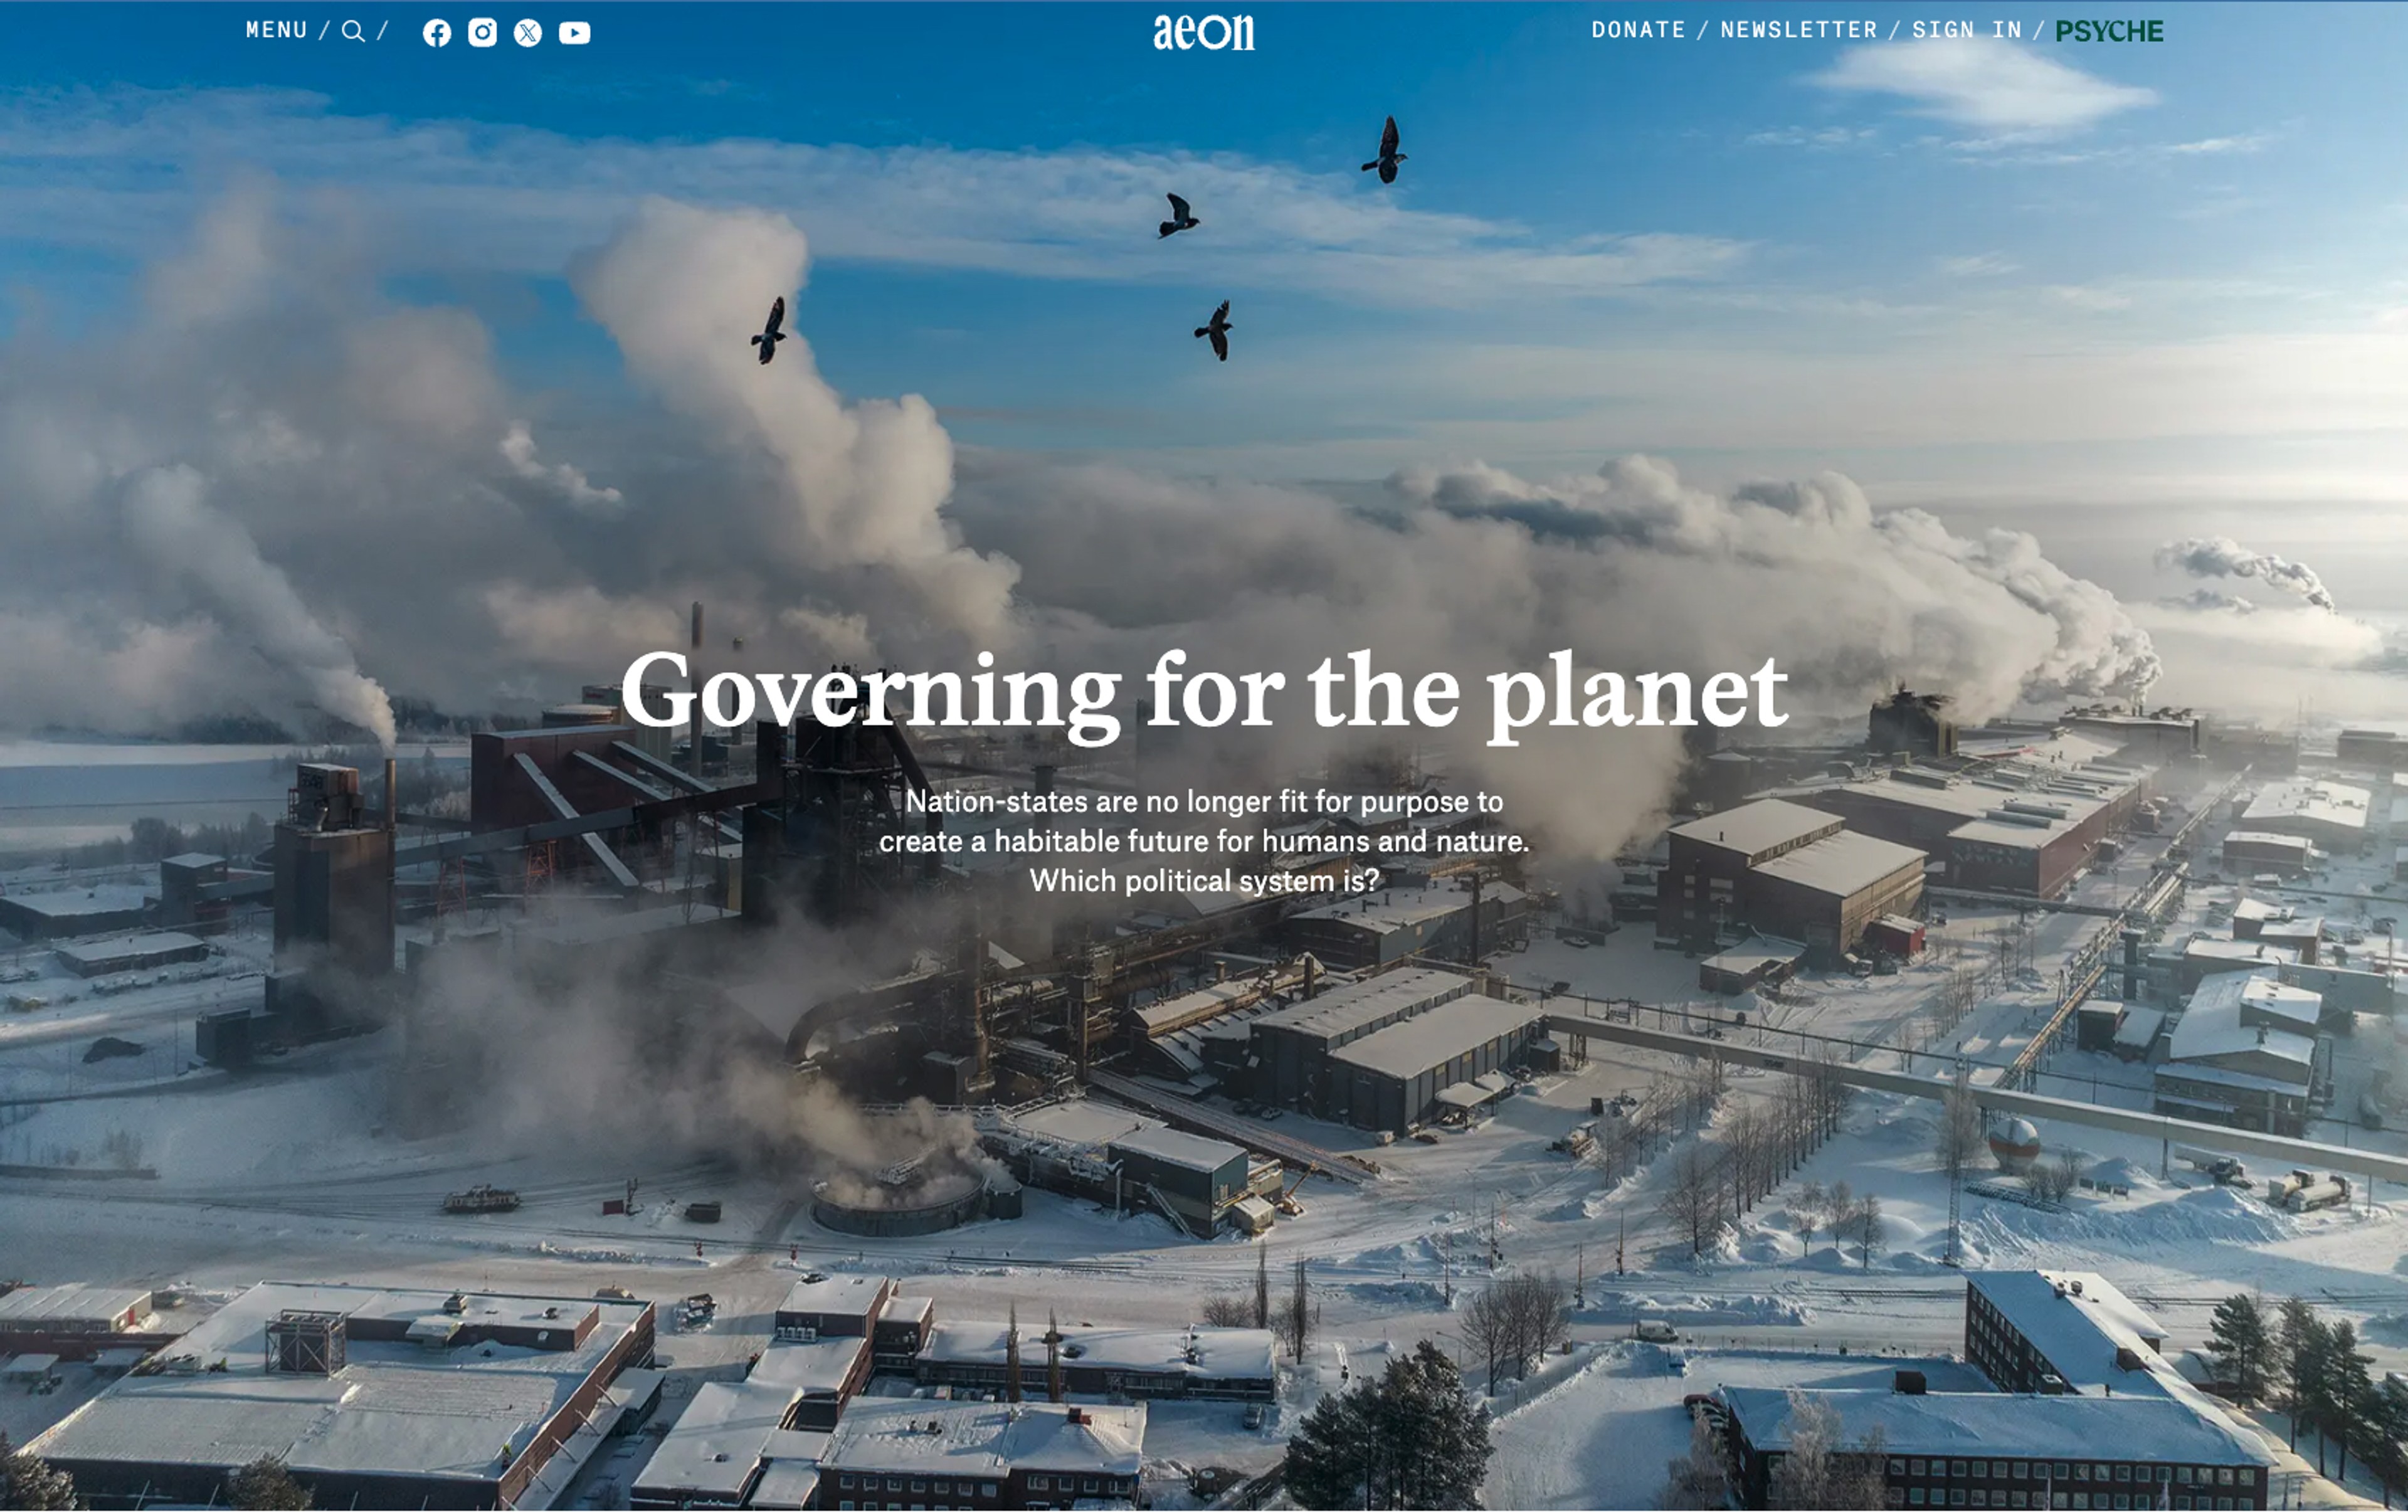 image from Aeon article "Governing for the planet"